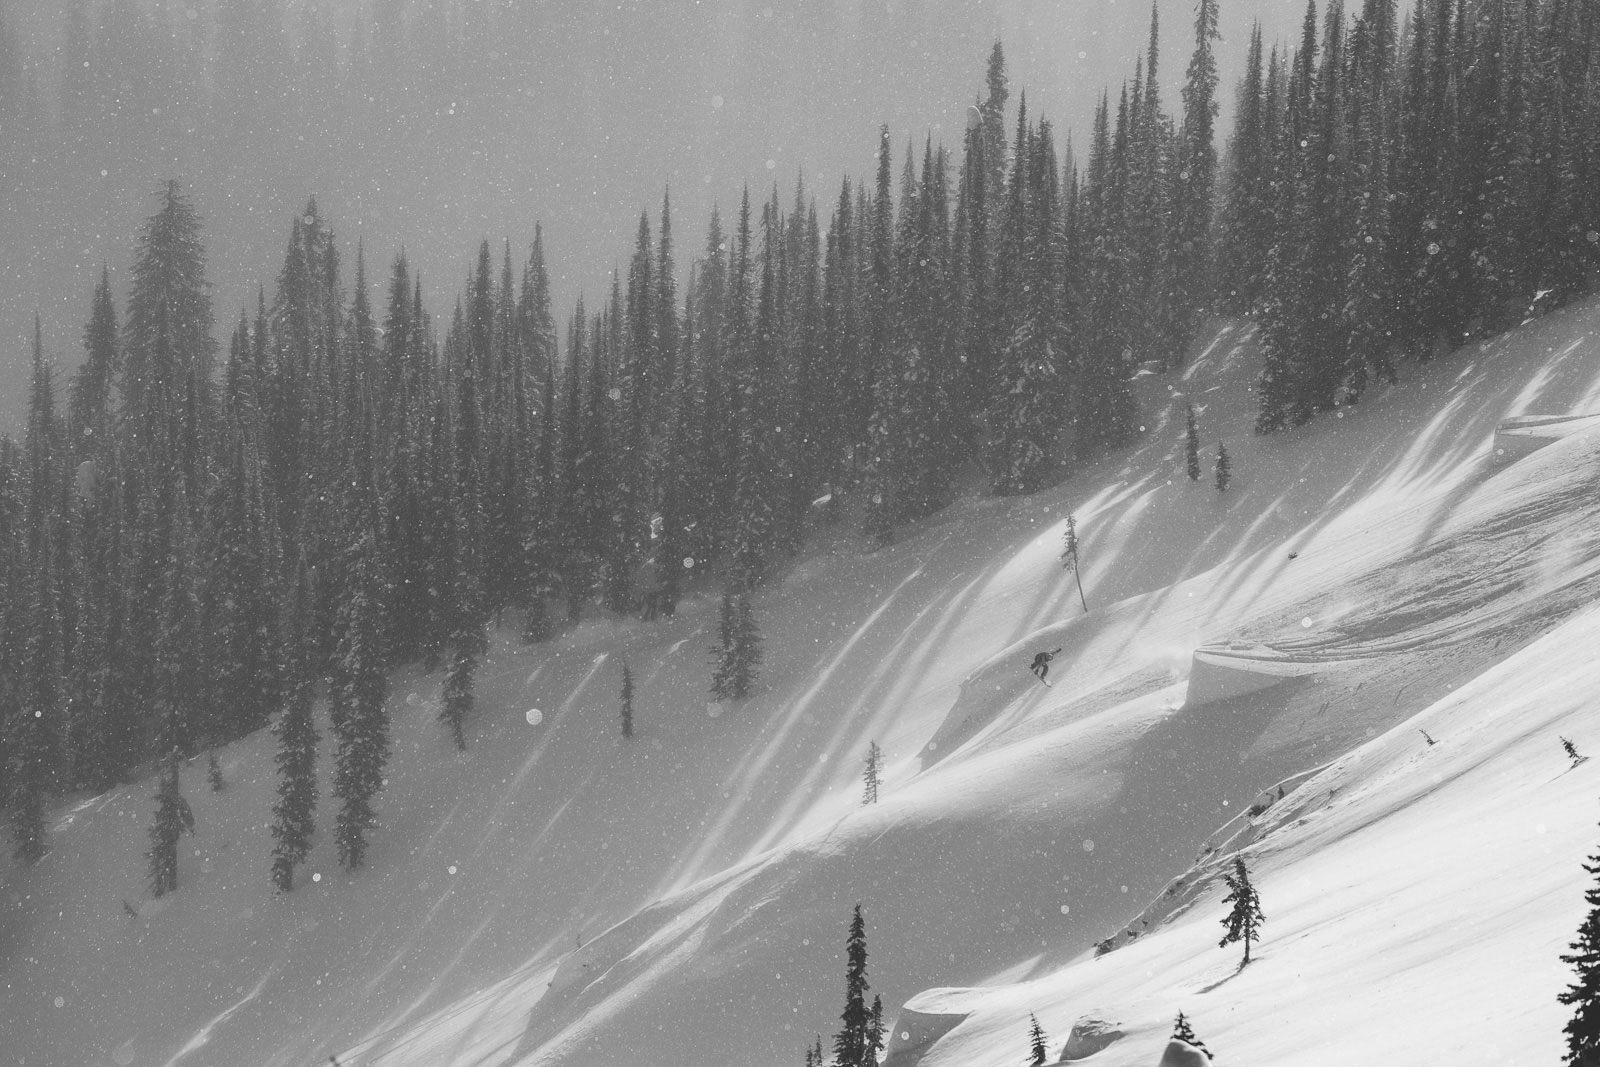 Person snowboarding down mountain in black and white